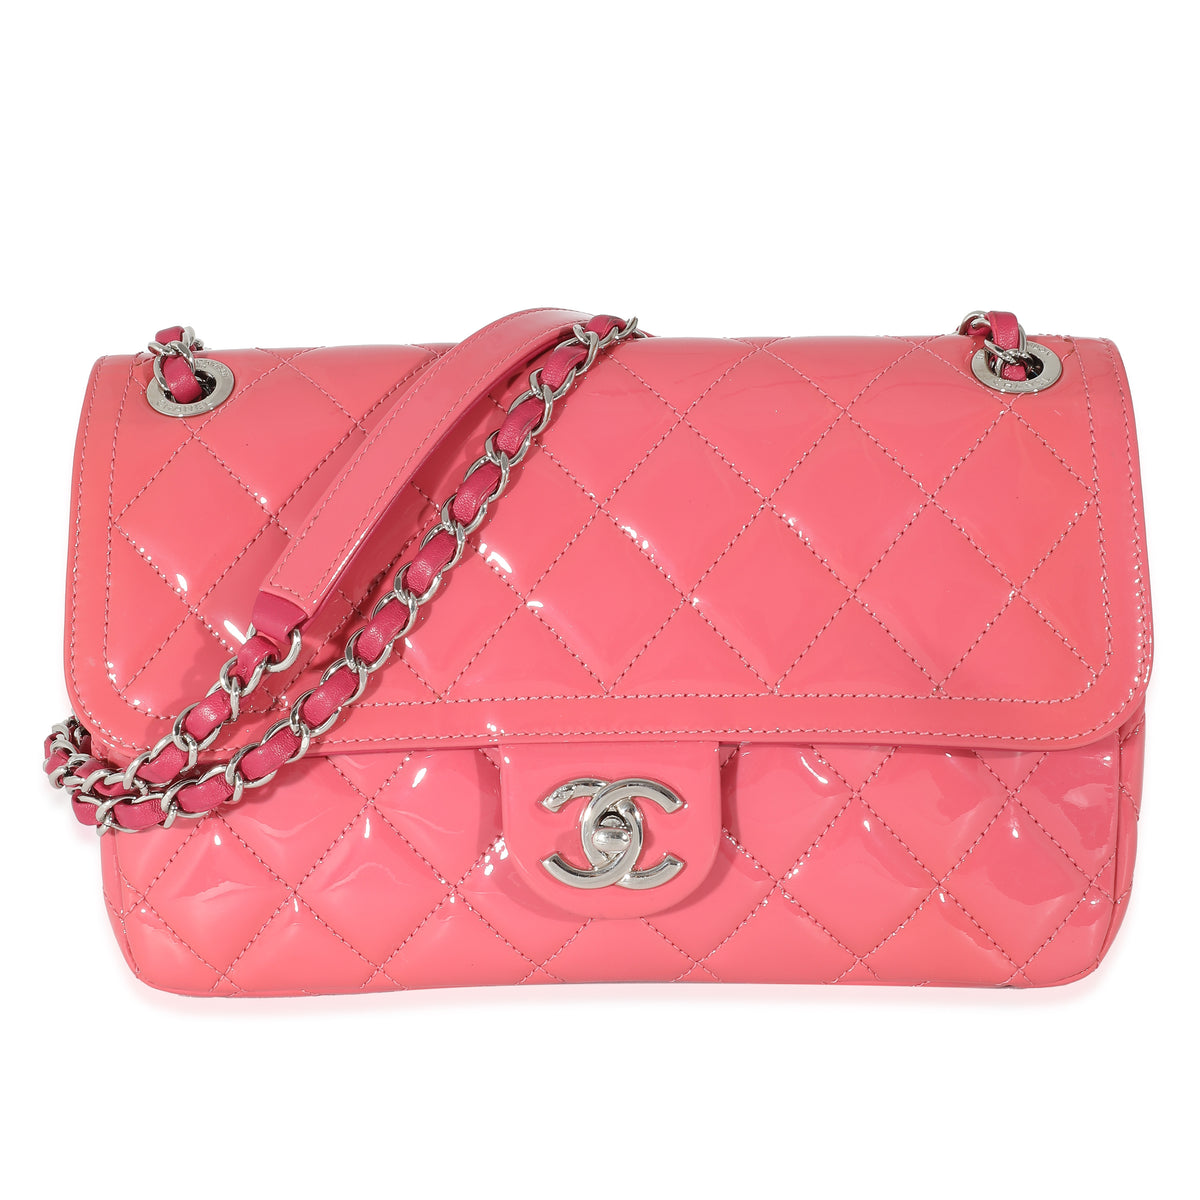 Chanel Pink Quilted Patent Leather Medium Coco Shine Flap Bag, myGemma